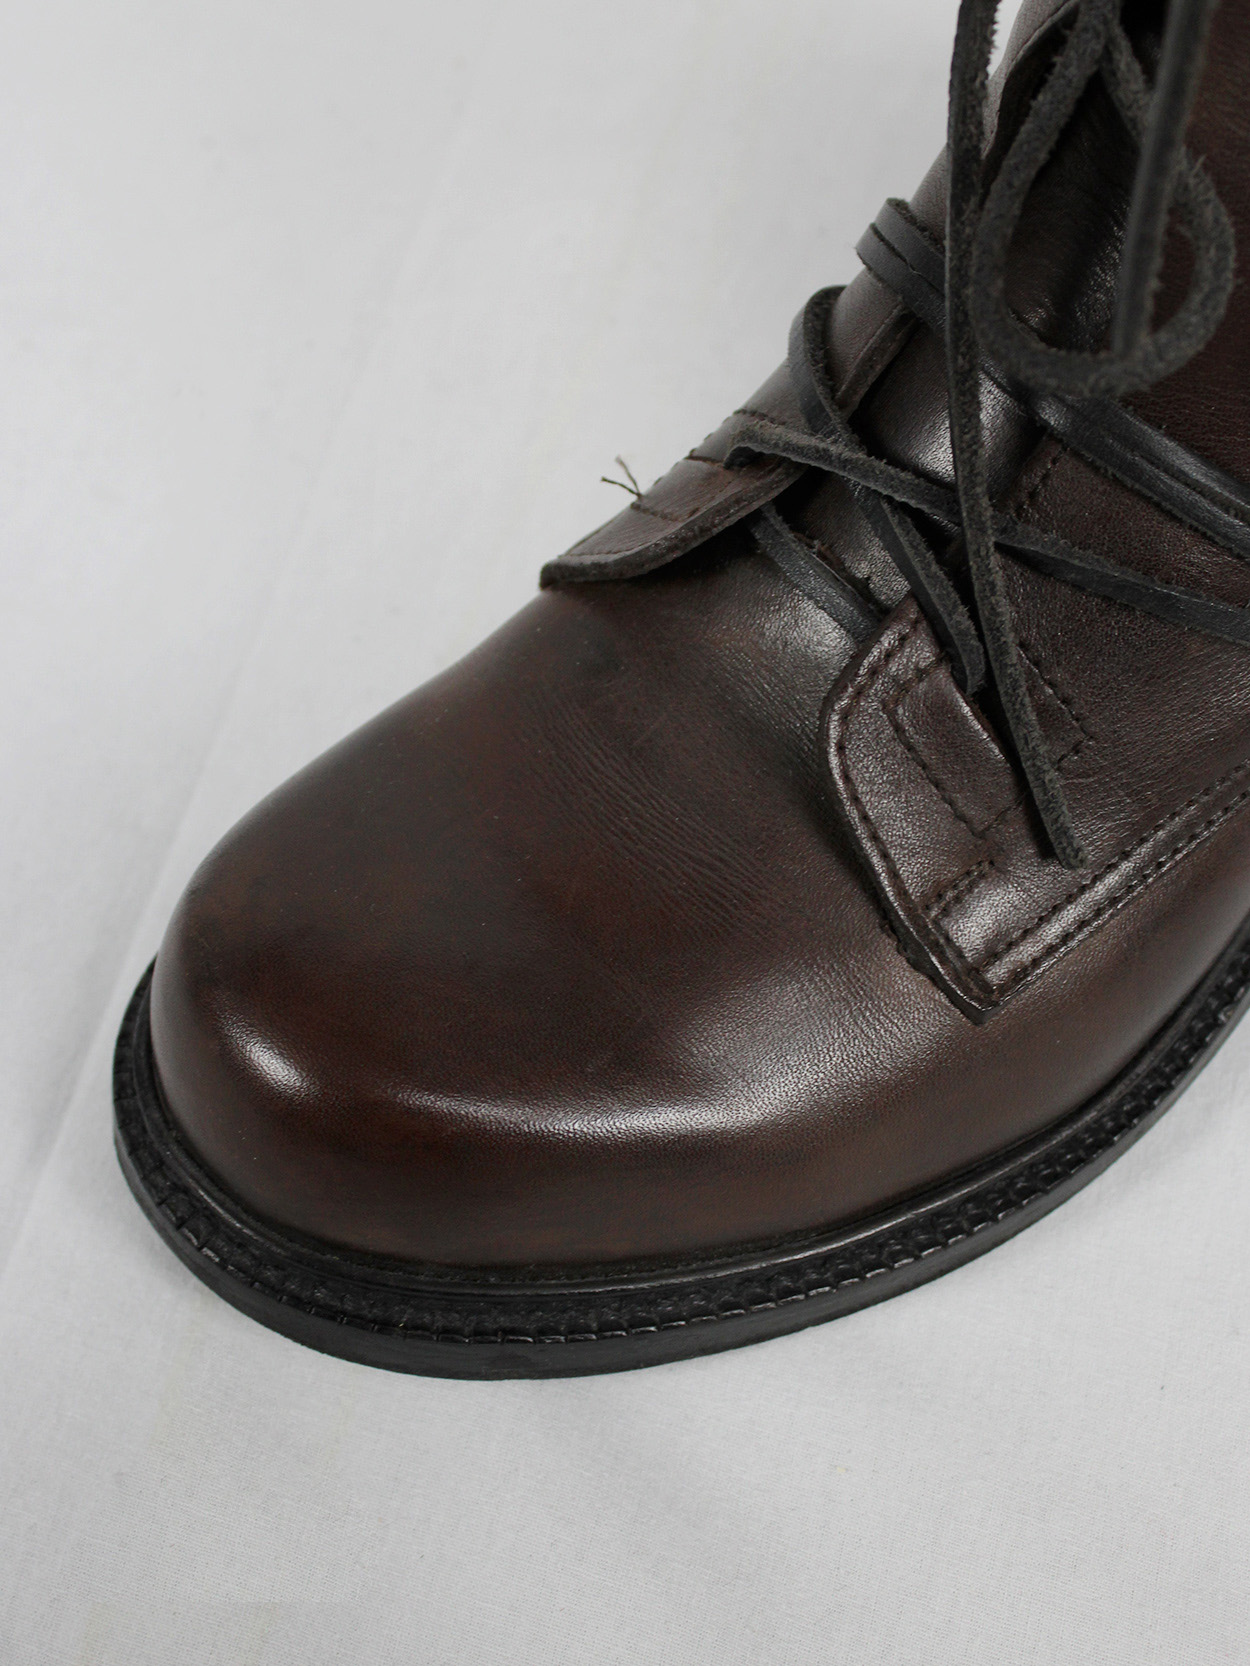 Dirk Bikkembergs brown tall boots with laces through the soles vaniitas (2)